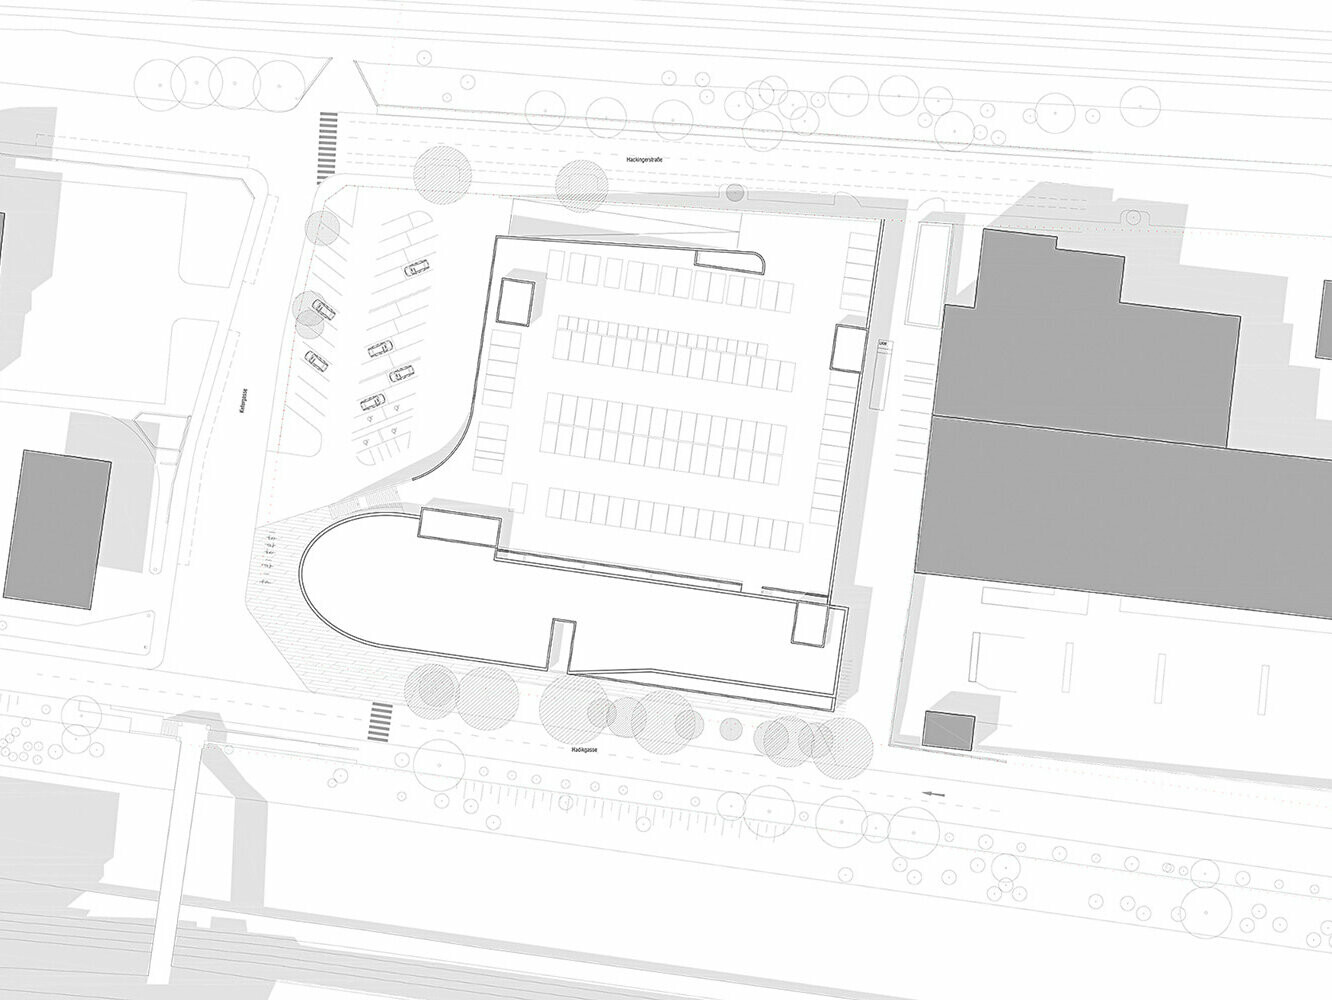 A sketch of the ÖAMTC building can be seen. The whole area is mapped.